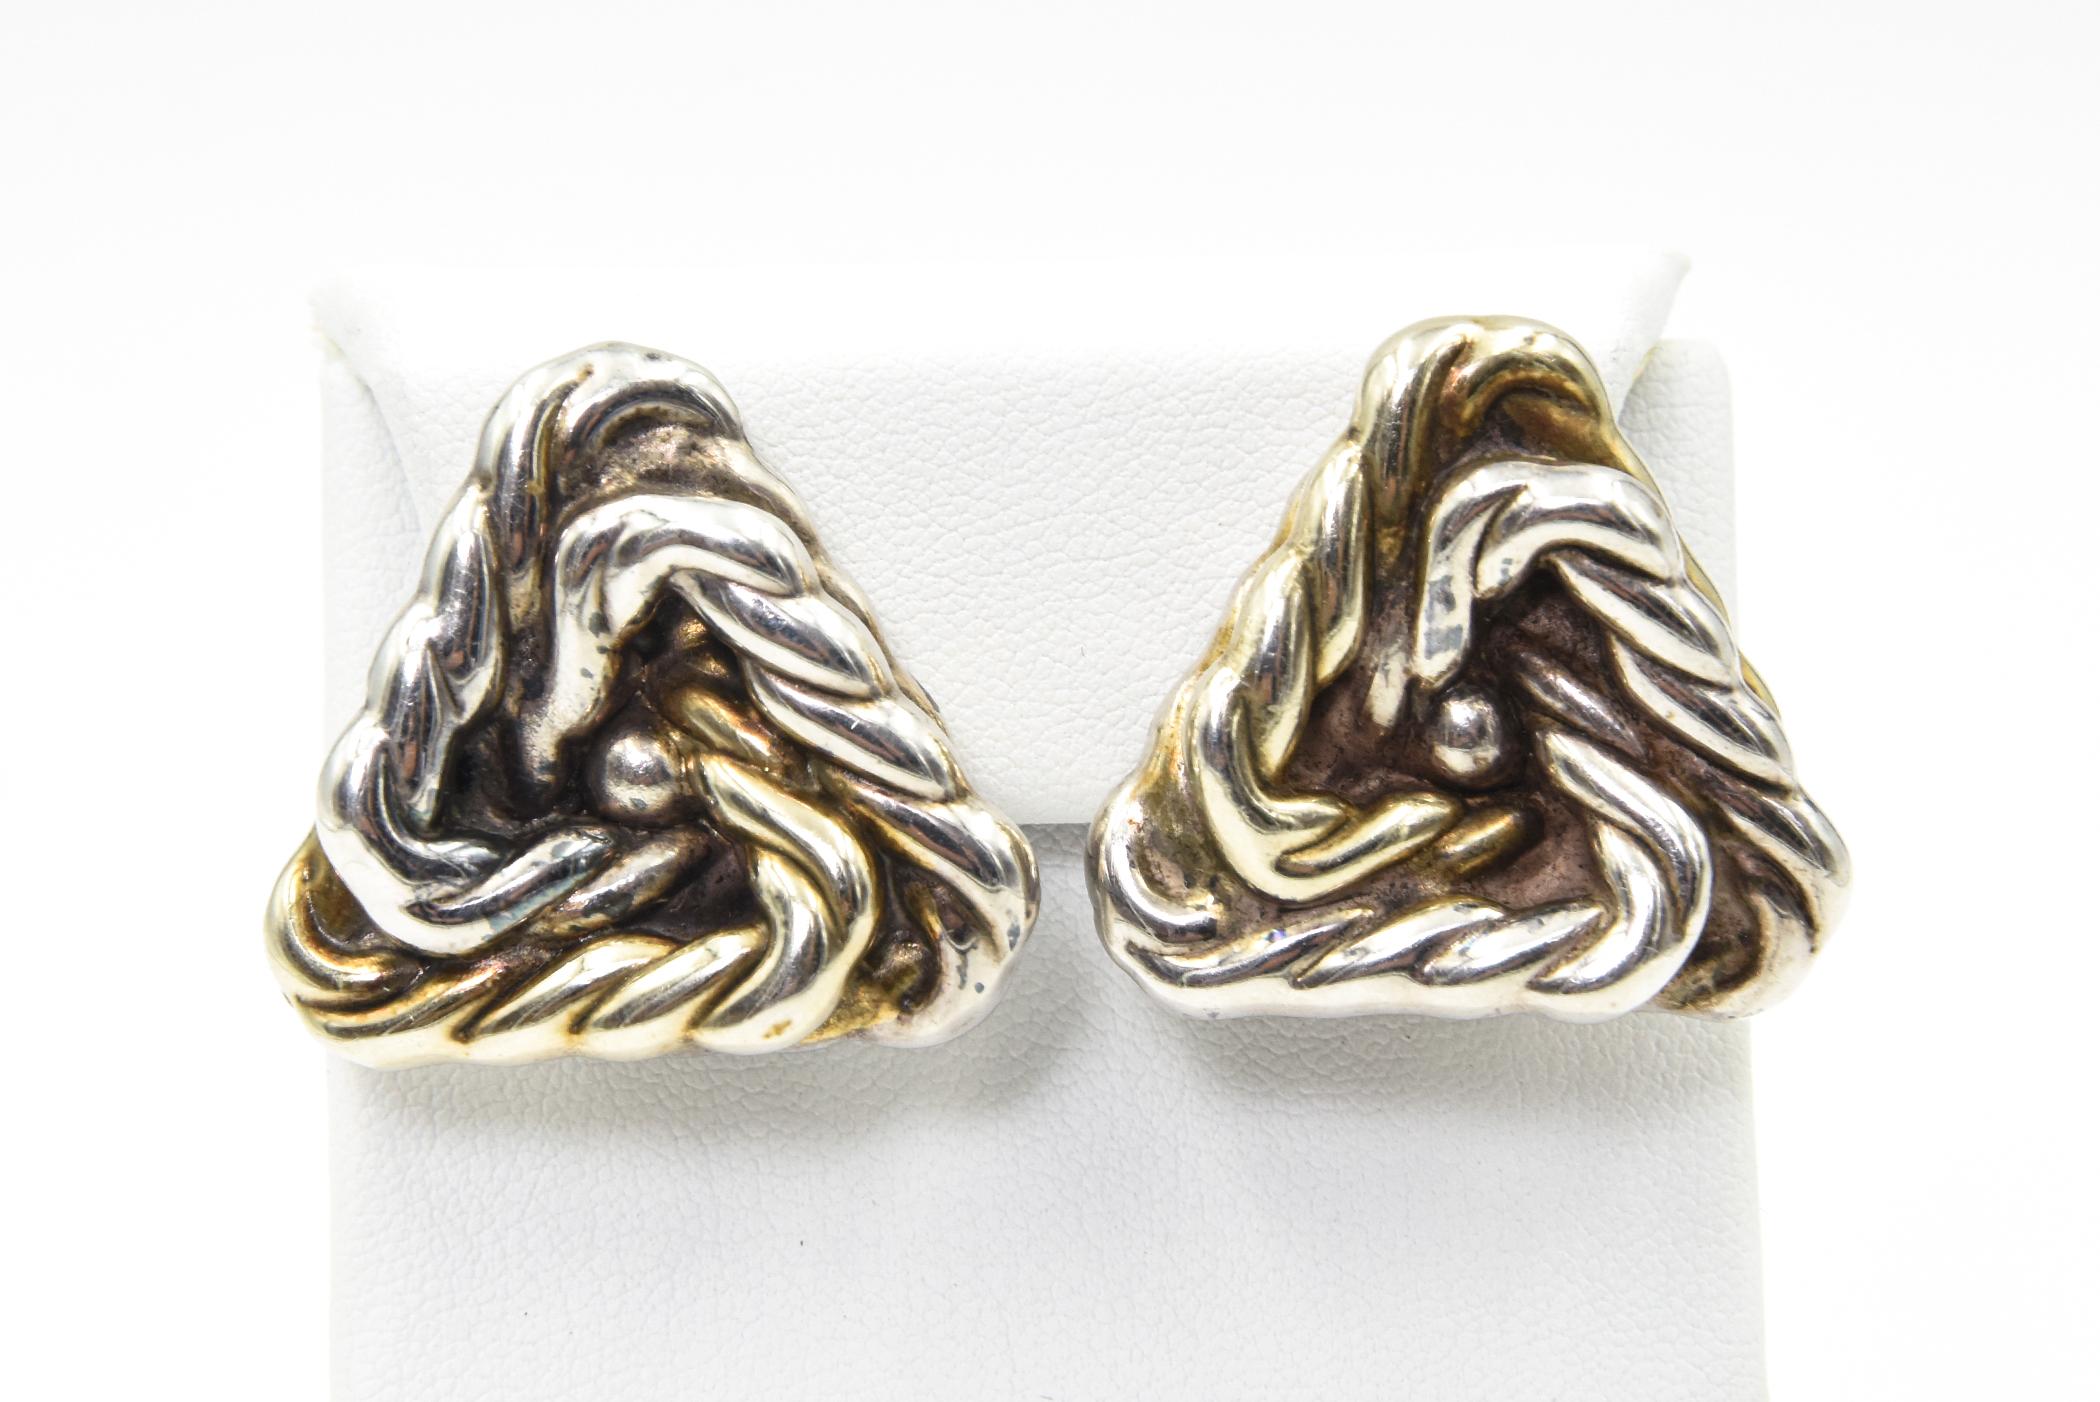 Classic sterling silver triangular 3D earrings featuring a highly stylized twisted rope design with a silver bead centrally set.  They are large, yet light weight with clip-on backs.  No piercing required.  Marked 925 for sterling on their backs.